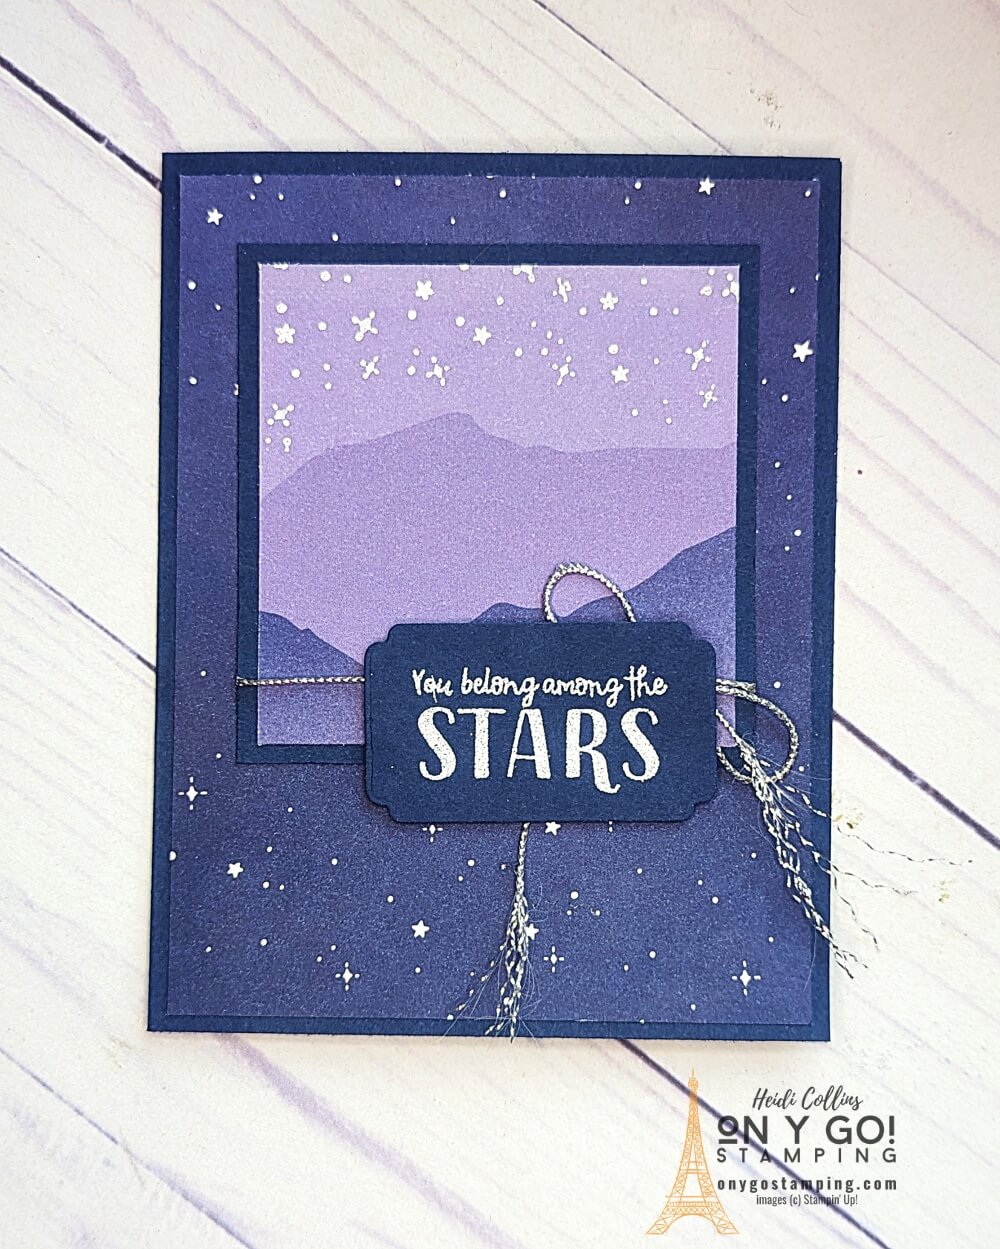 Are you ready to make your own handmade card this season? With the 